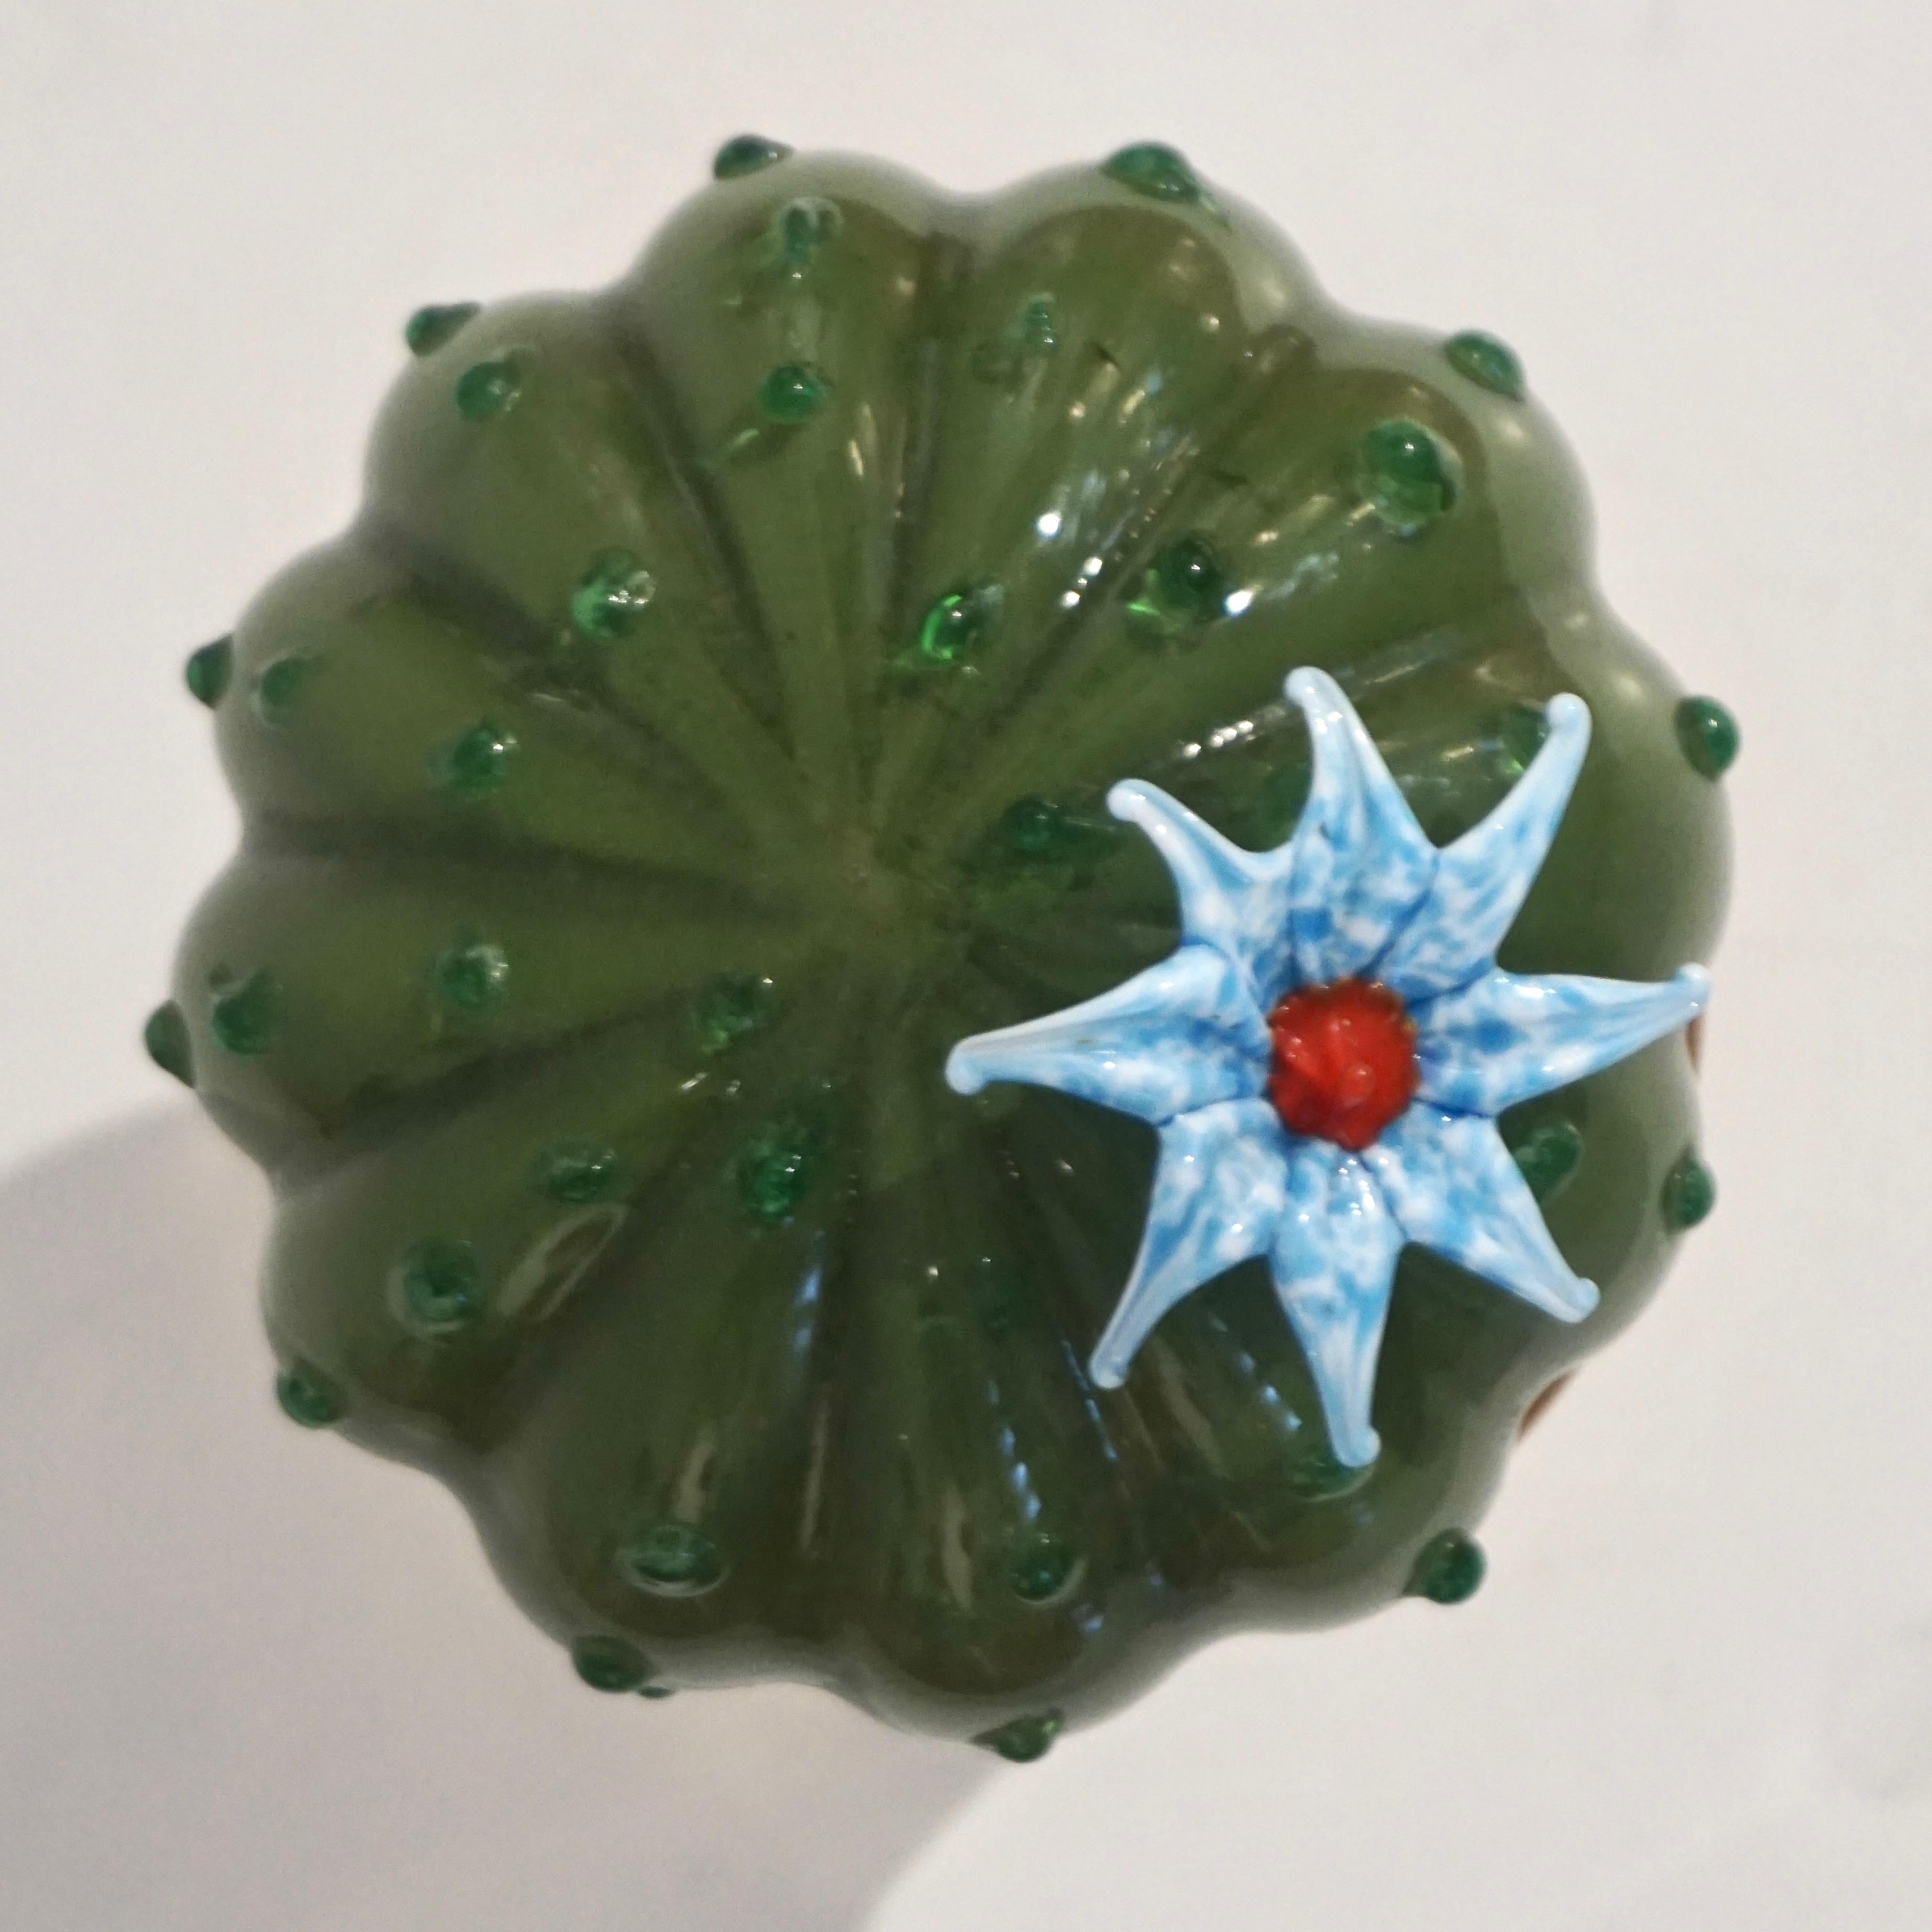 Art Glass 1990s Vintage Italian Green Murano Glass Small Cactus Plant with Blue Flower